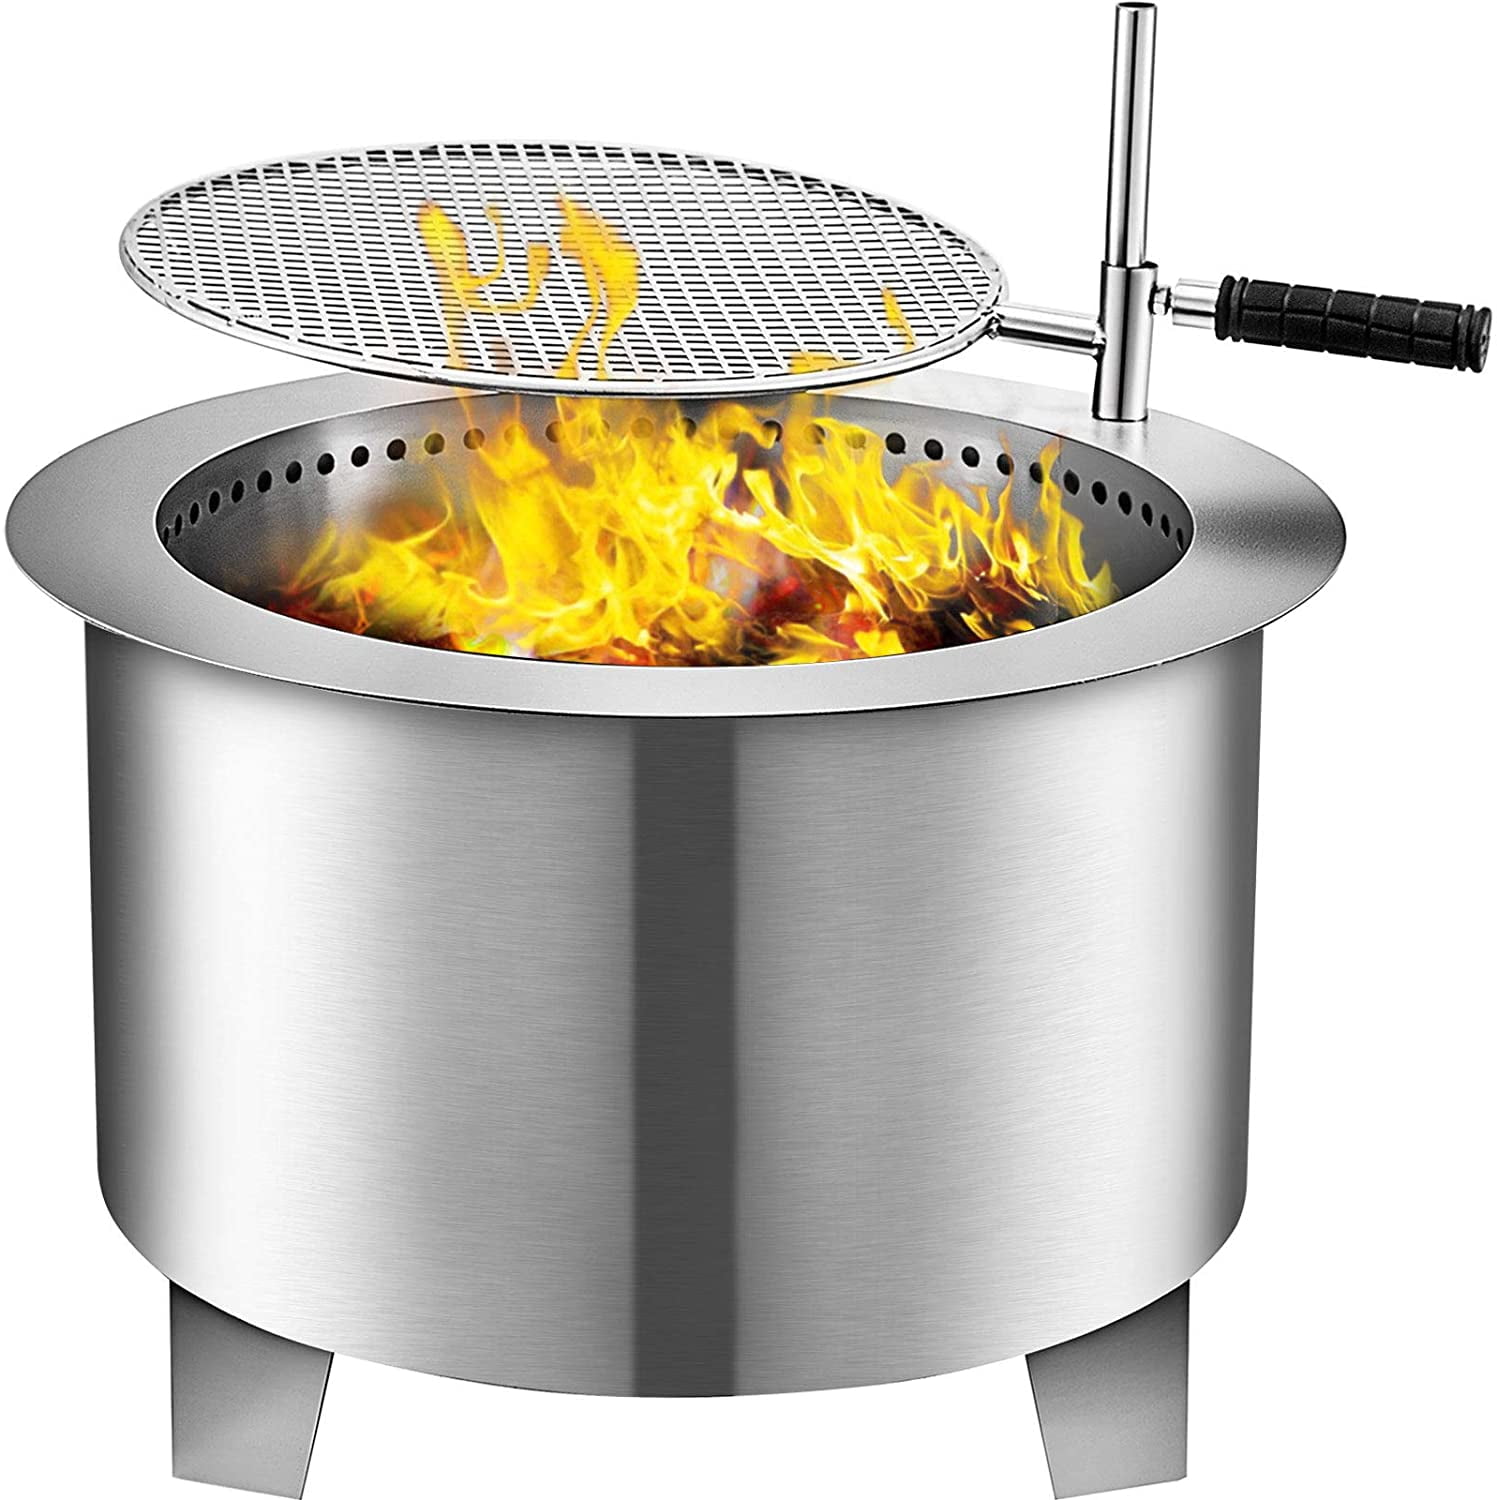 Vevor Stainless Steel Wood Burning Fire, Stainless Steel Fire Pit Grate